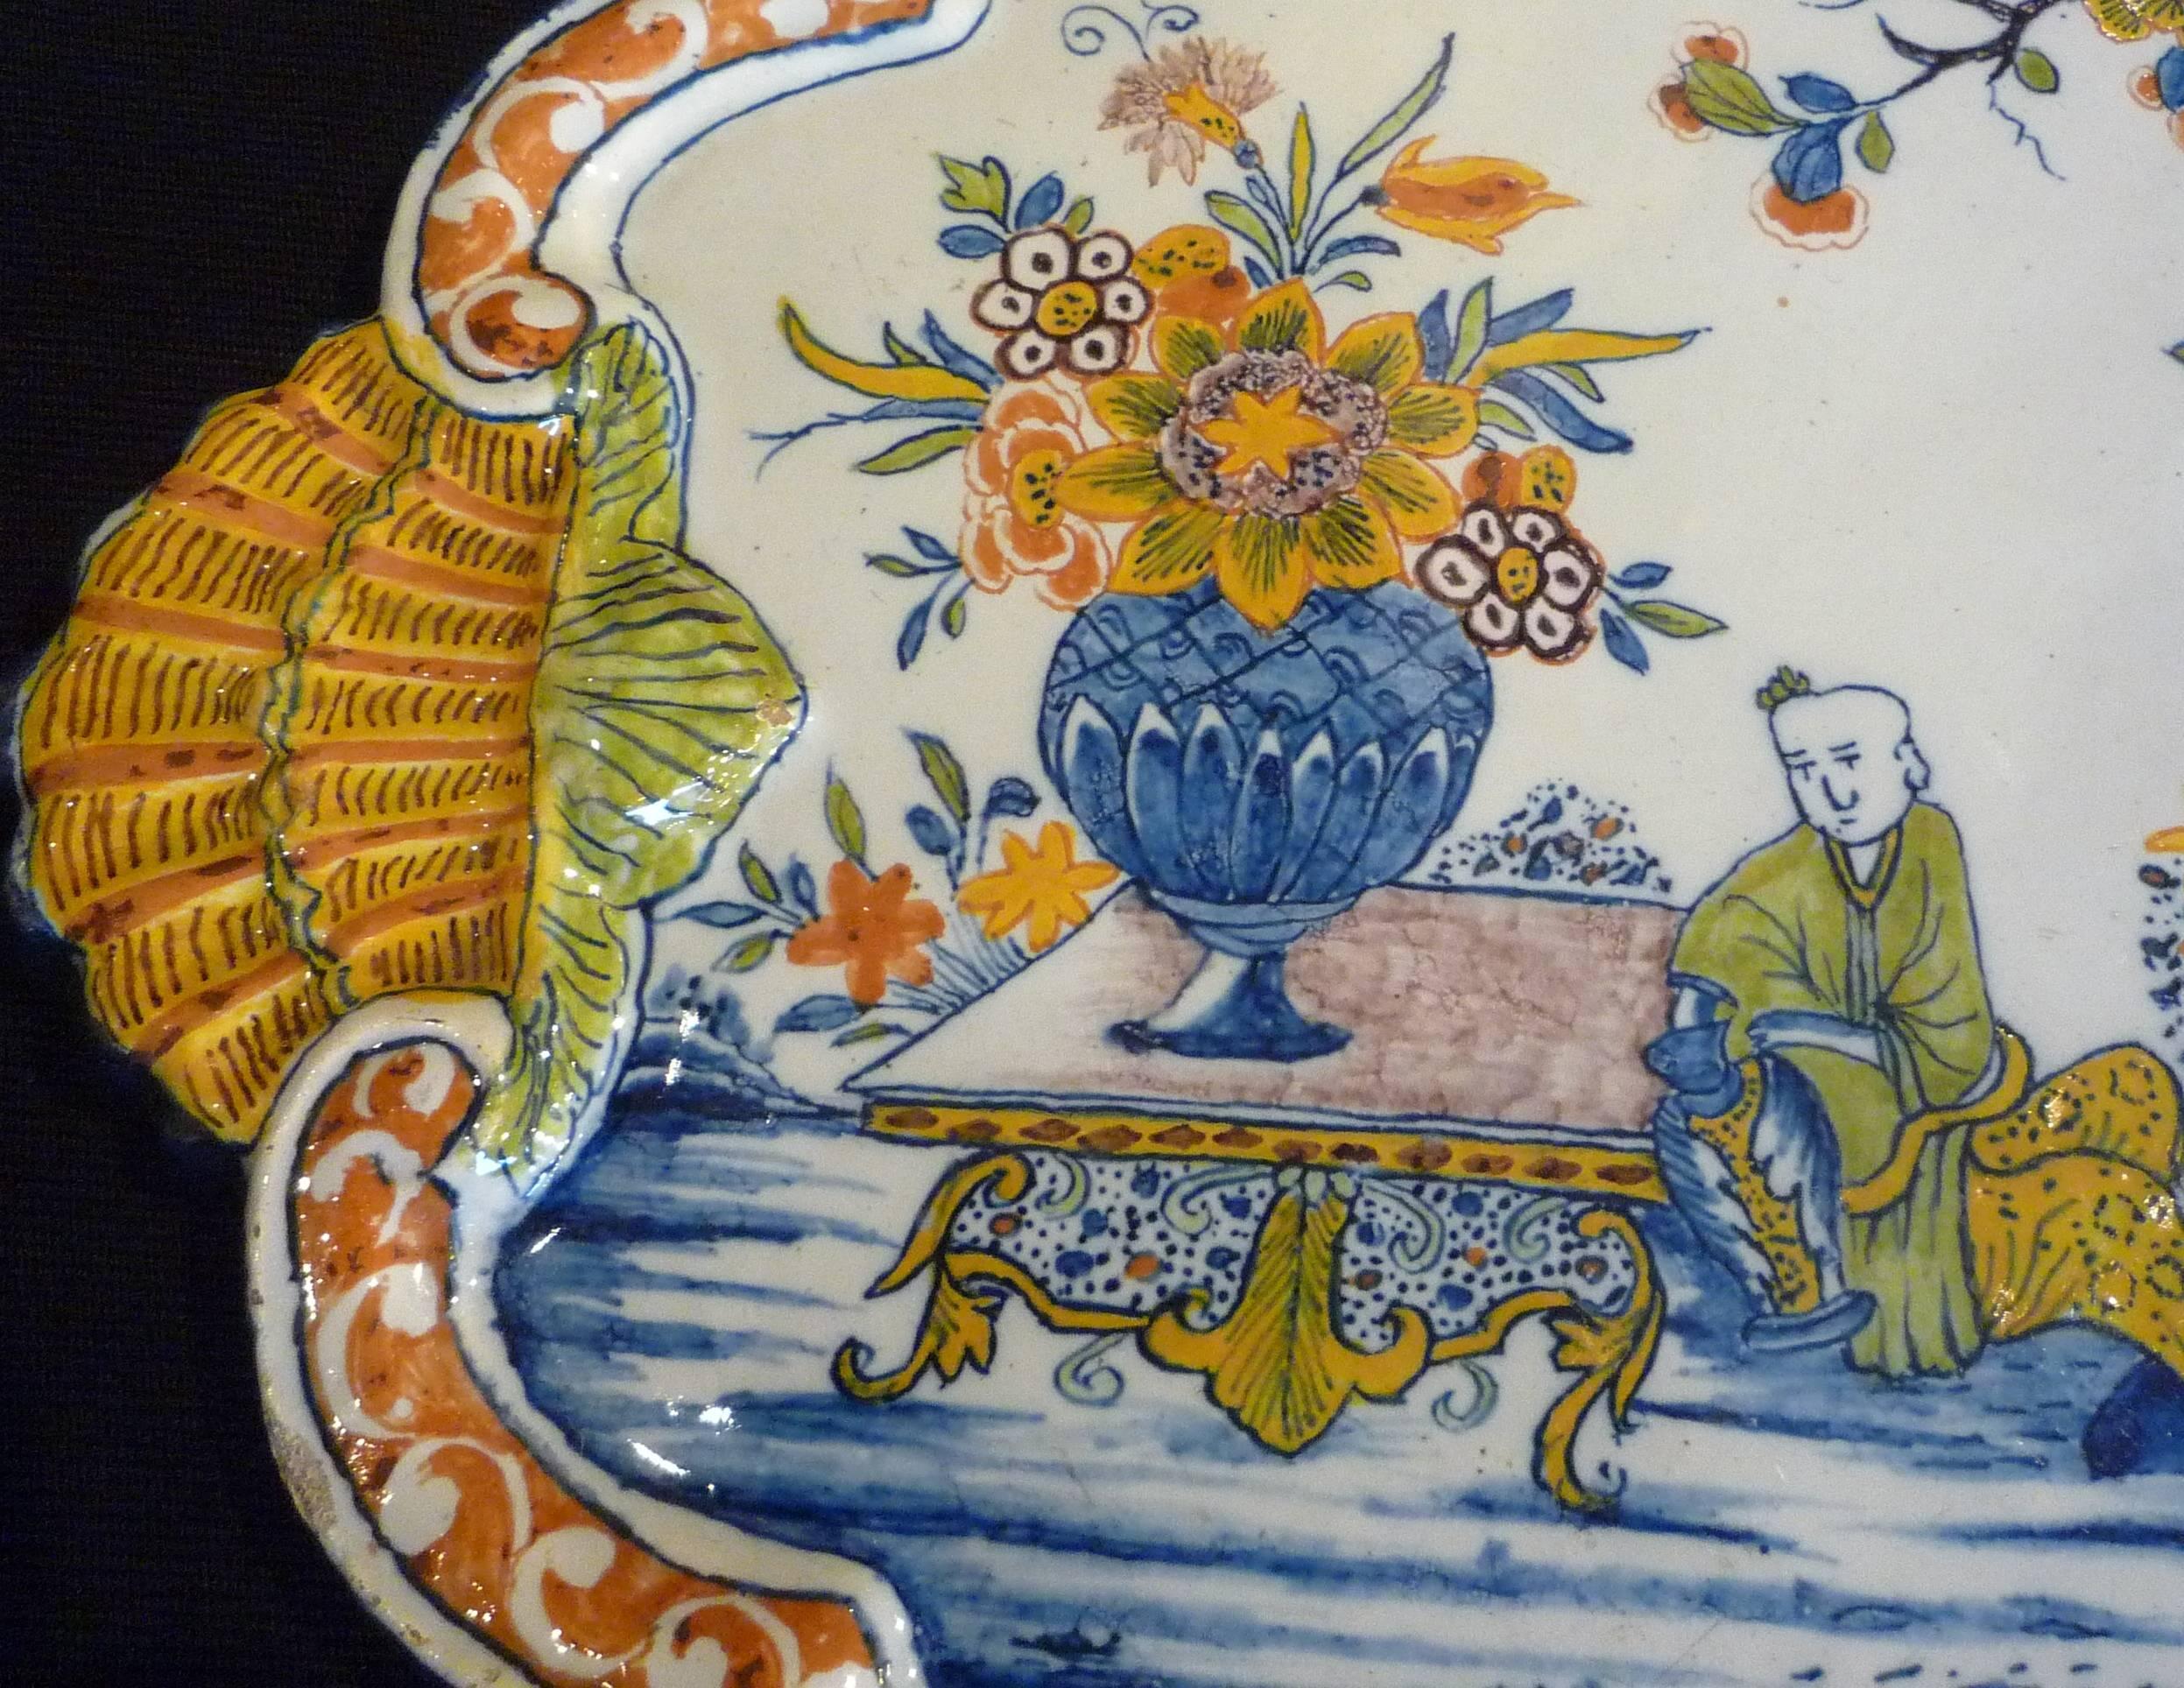 A large delft polychrome plaque with border of shells, the center with Chinese figures in a landscape, with birds, trees and flowers, first half of the 18th century. No restoration.